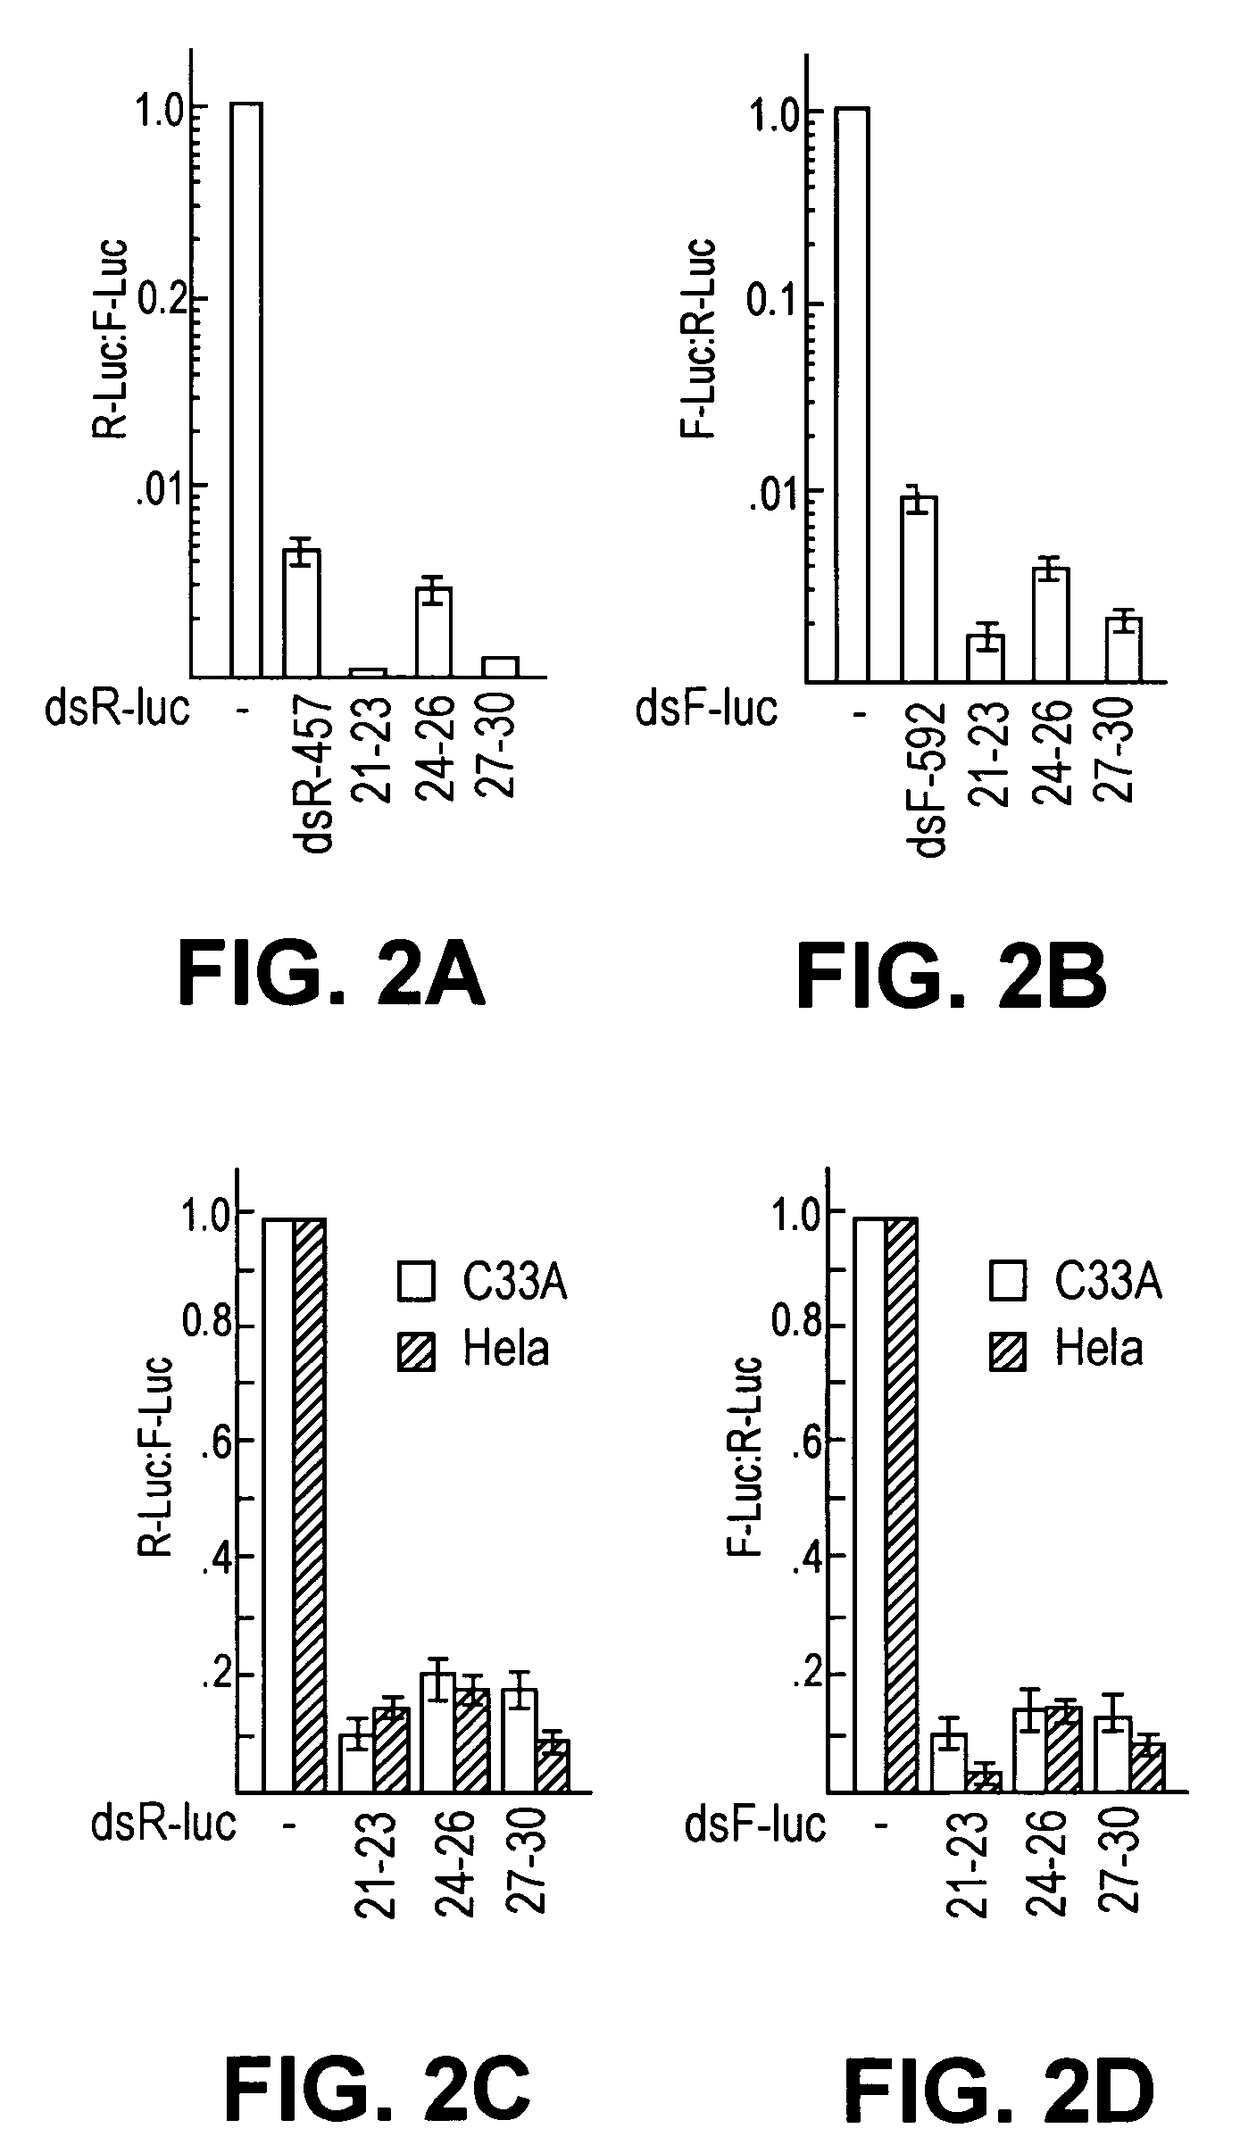 Method for efficient RNA interference in mammalian cells